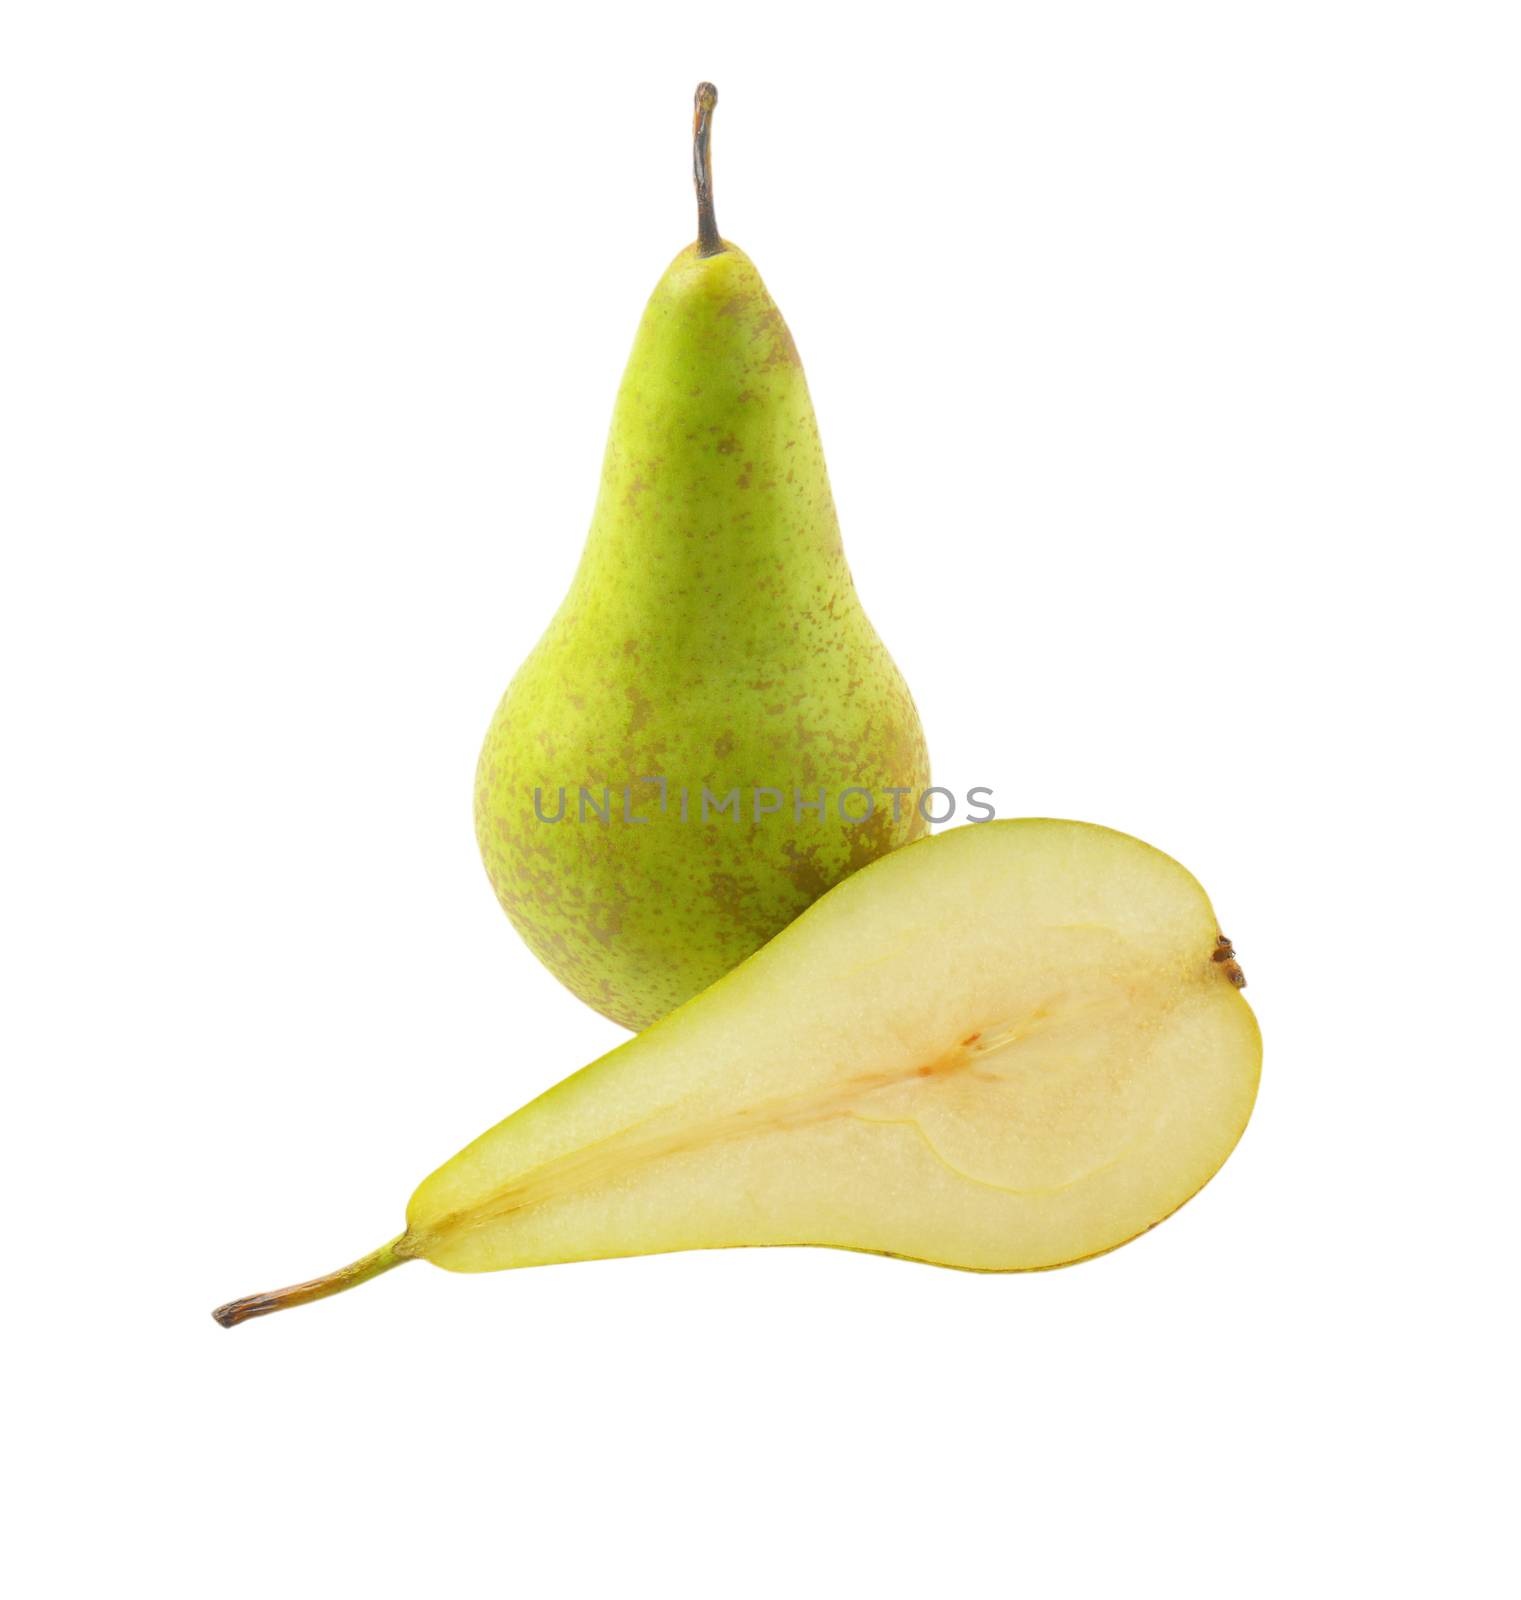 one and a half pears by Digifoodstock